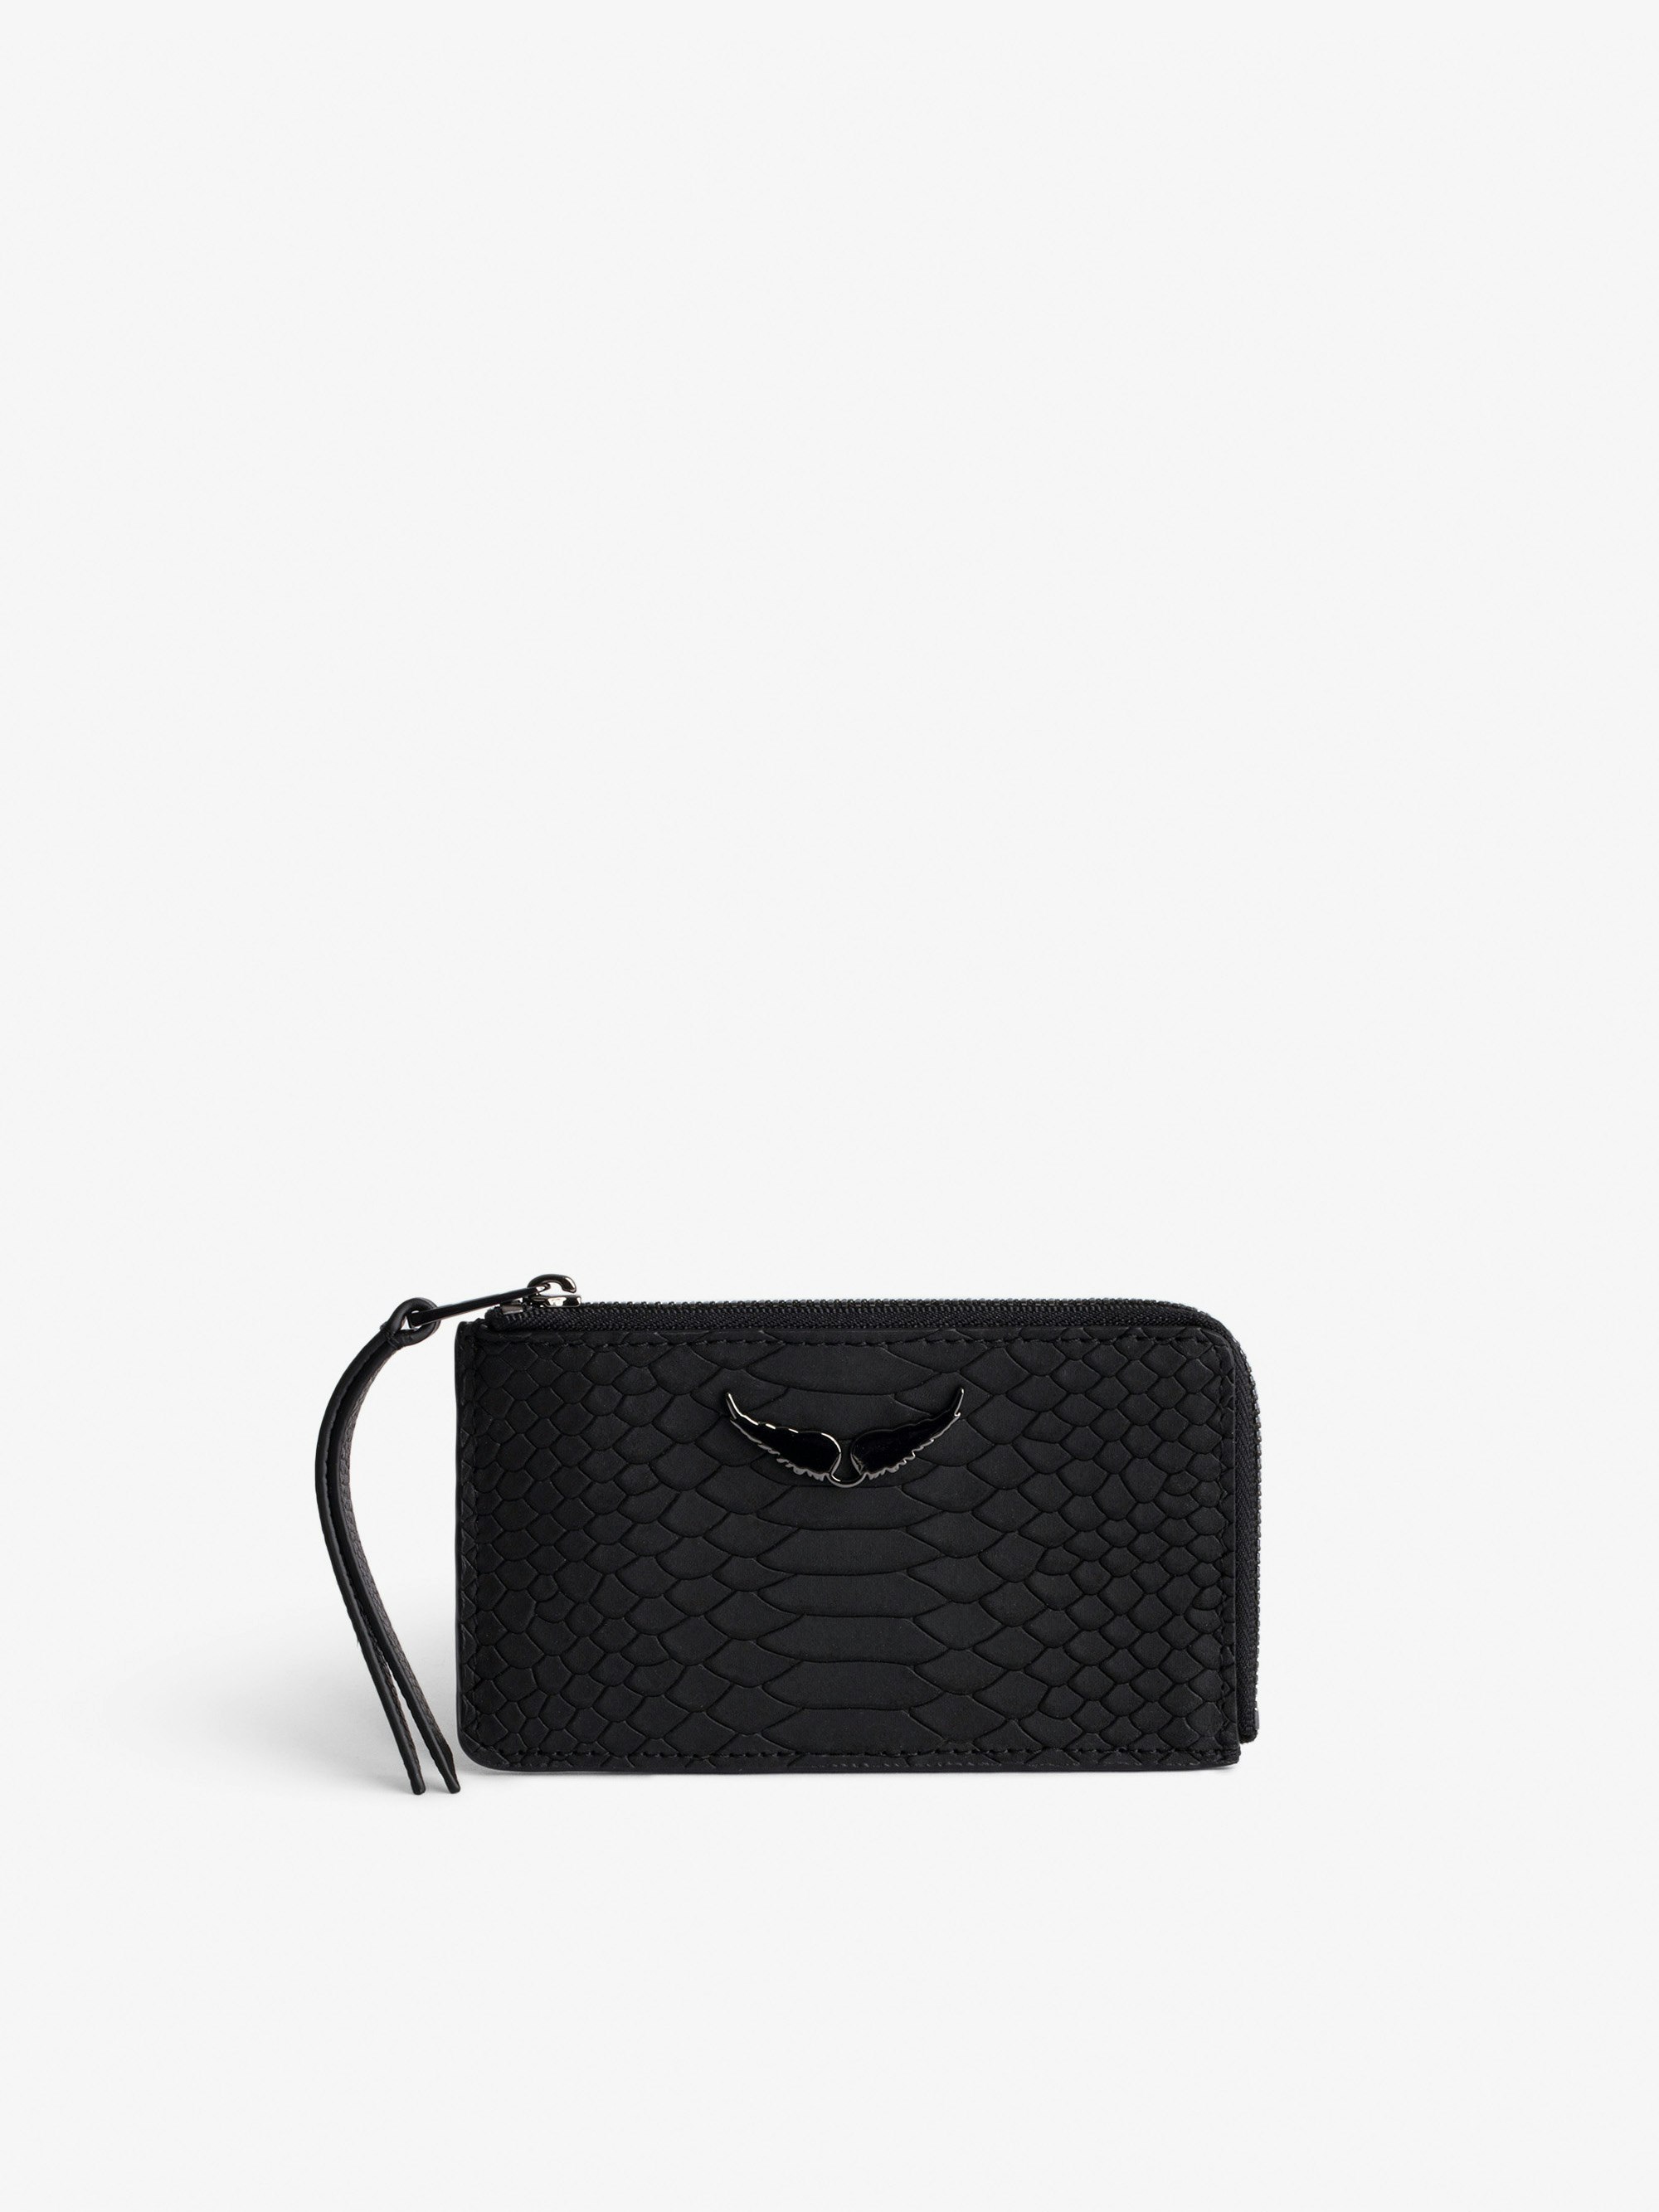 ZV Card Case - Women's card case in black python-effect leather